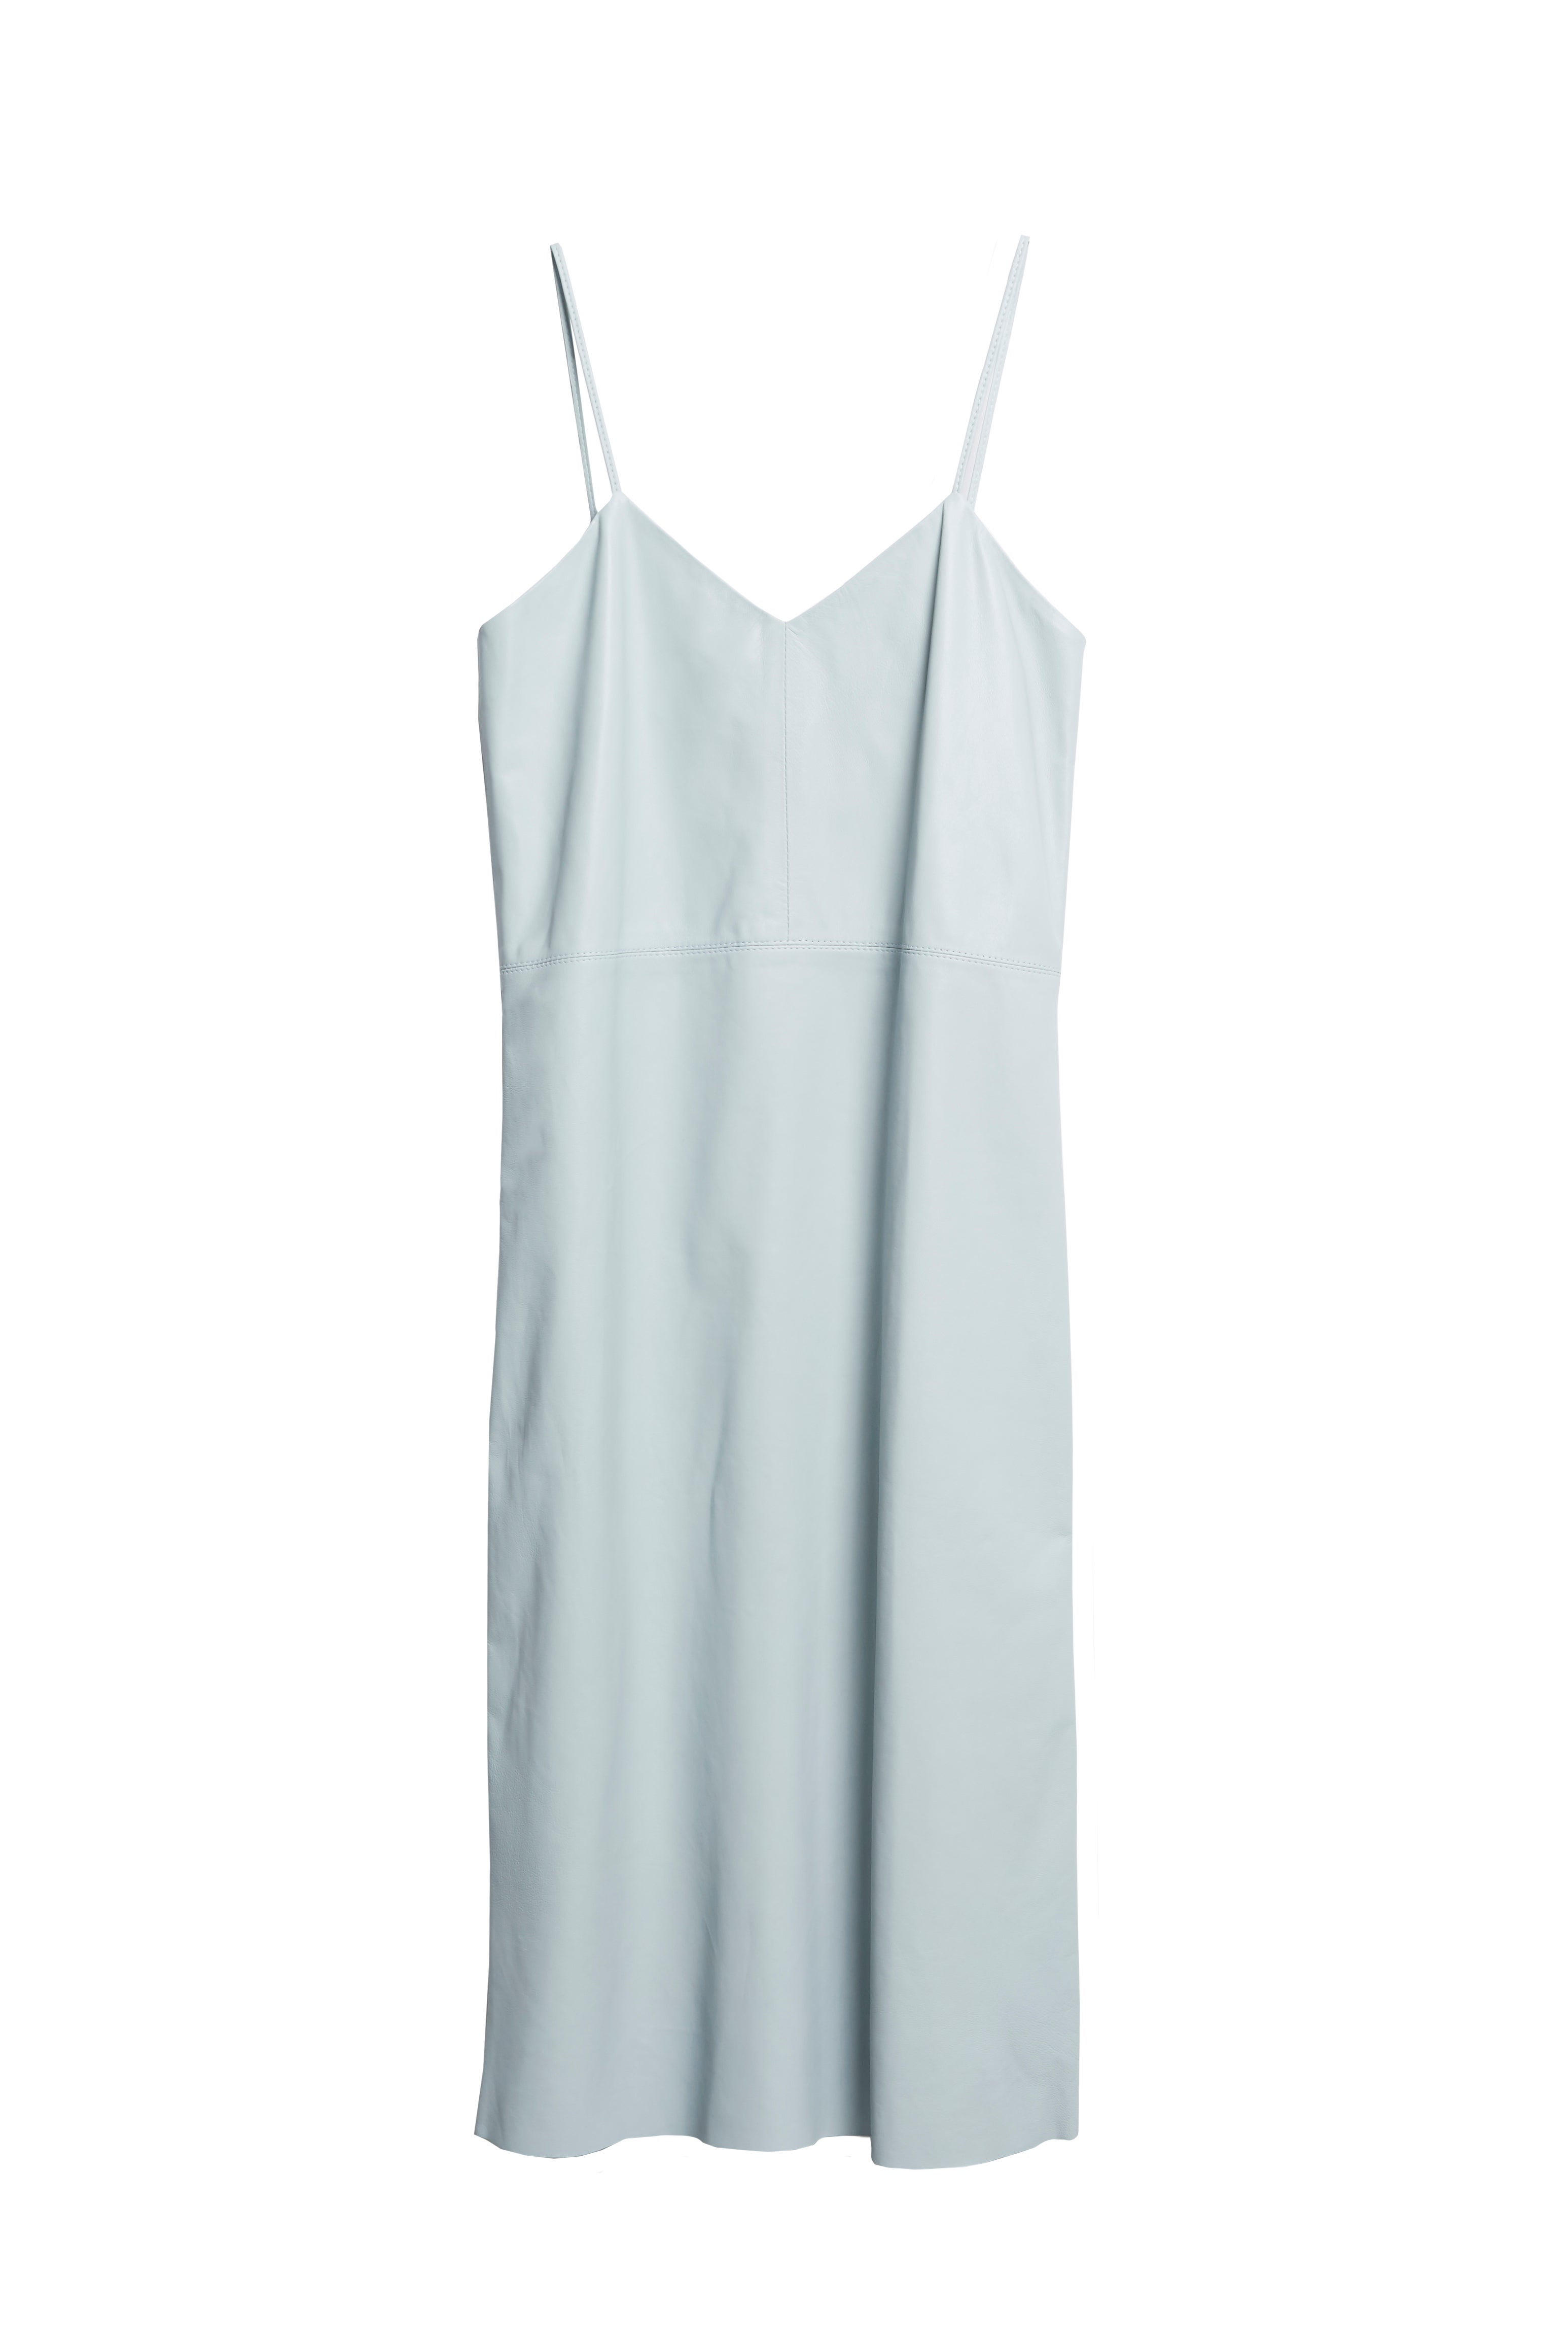 10 Slip Dresses That You Won't Want to Take Off 
